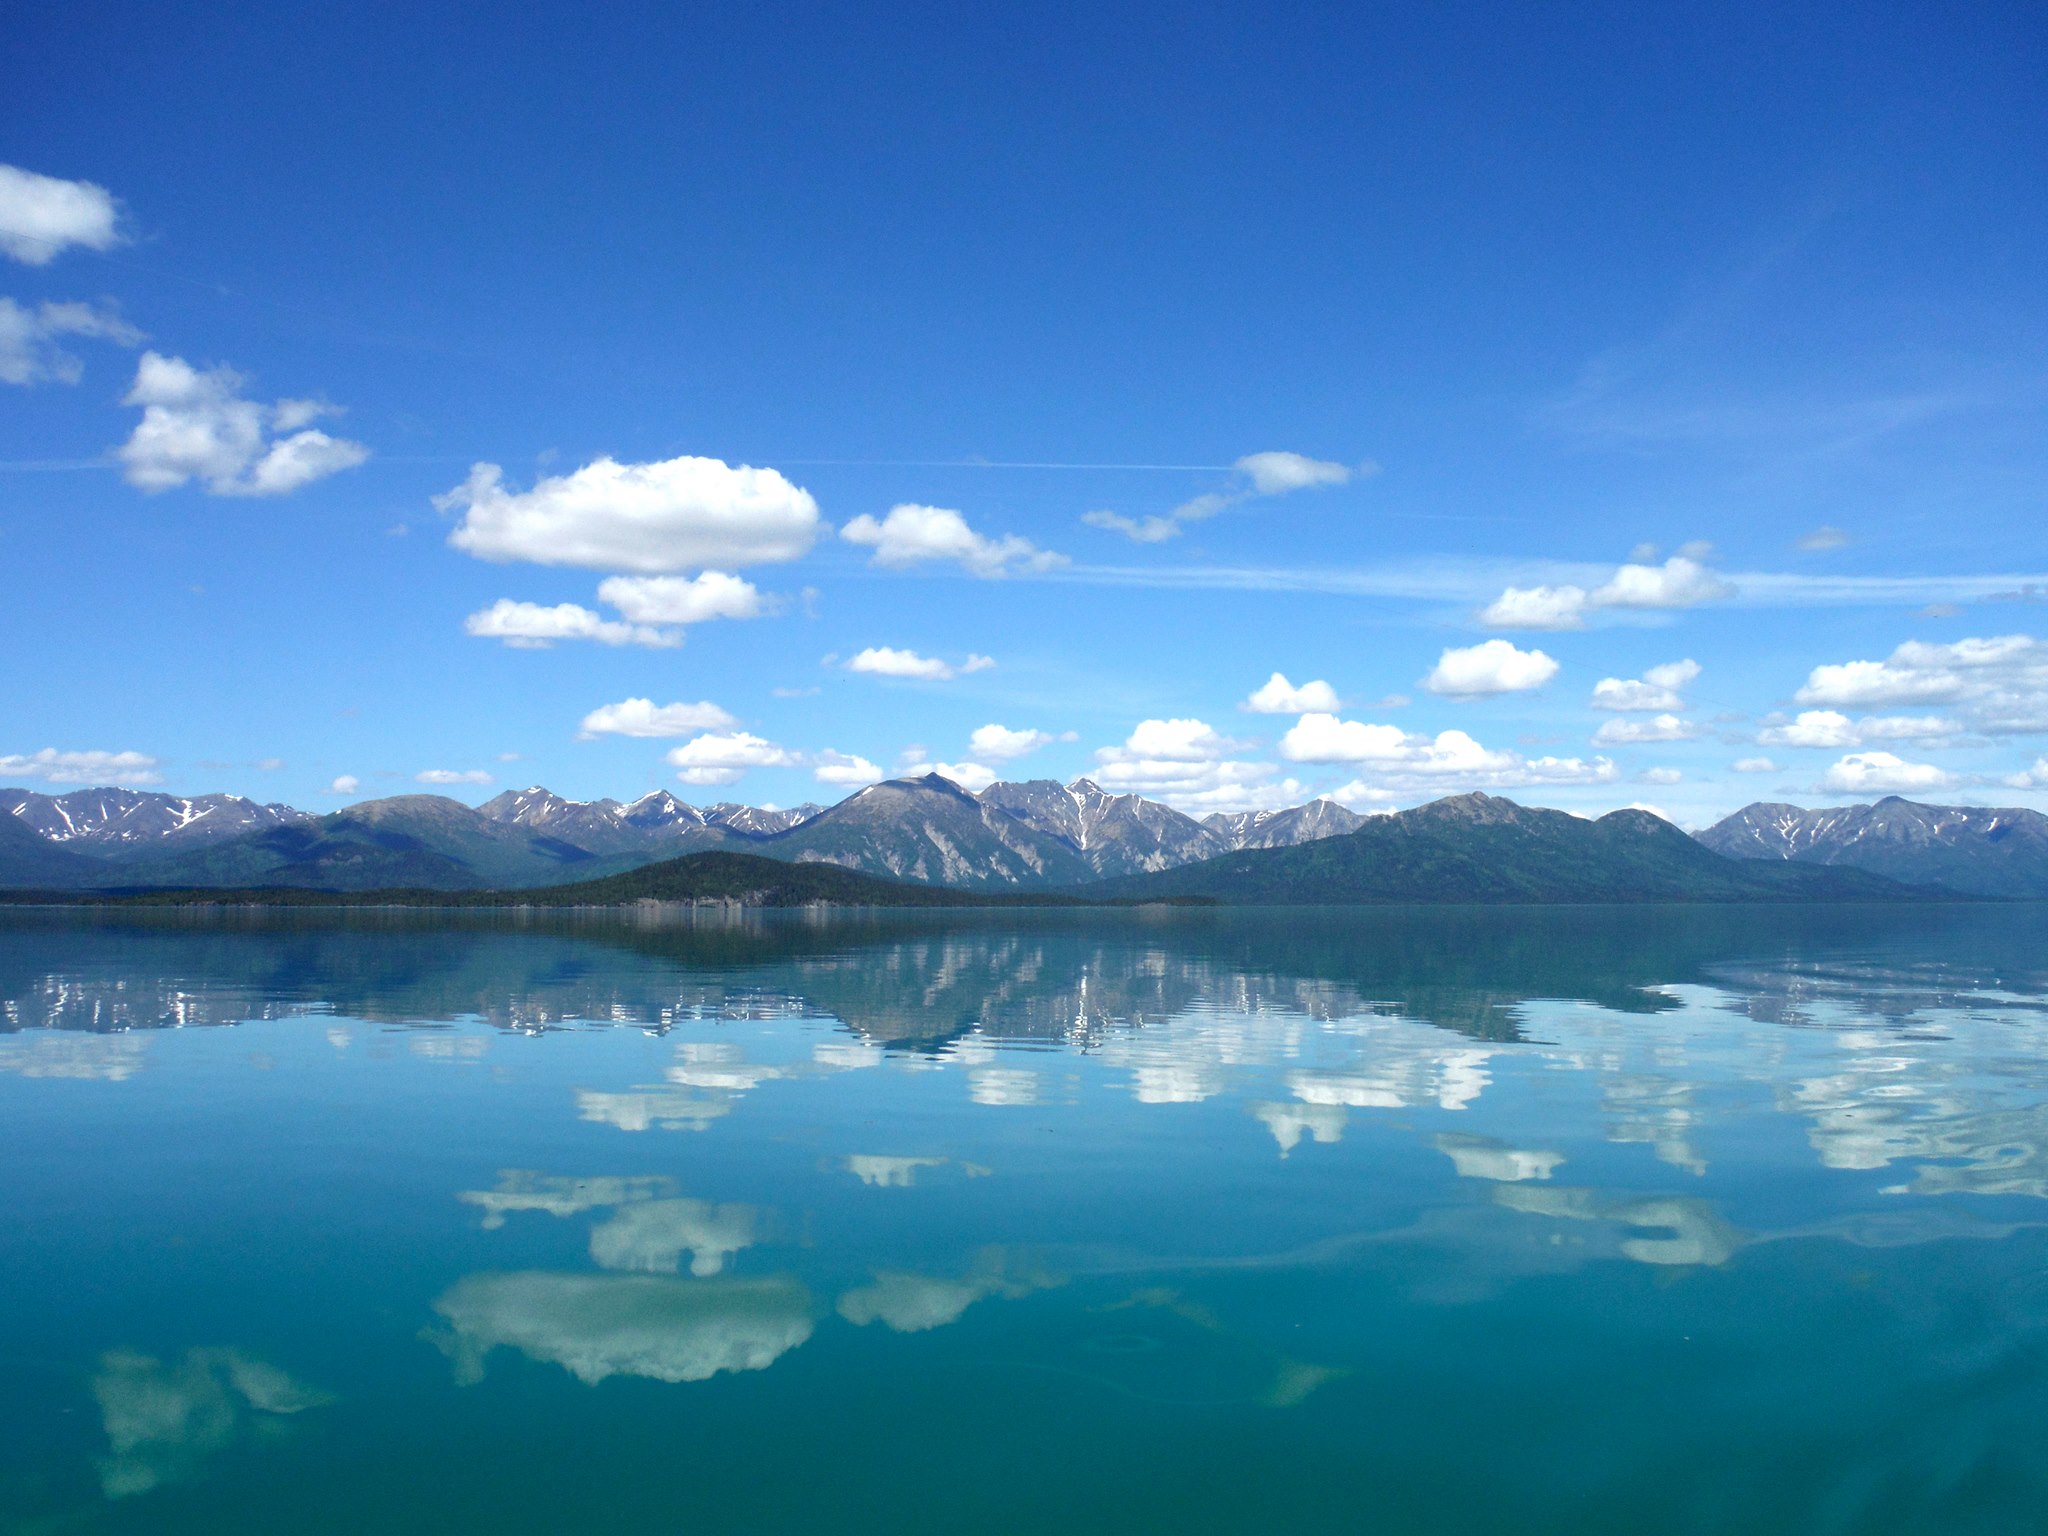 Photo of blue sky with fluffy white clouds reflect in calm lake with mountains in the background.